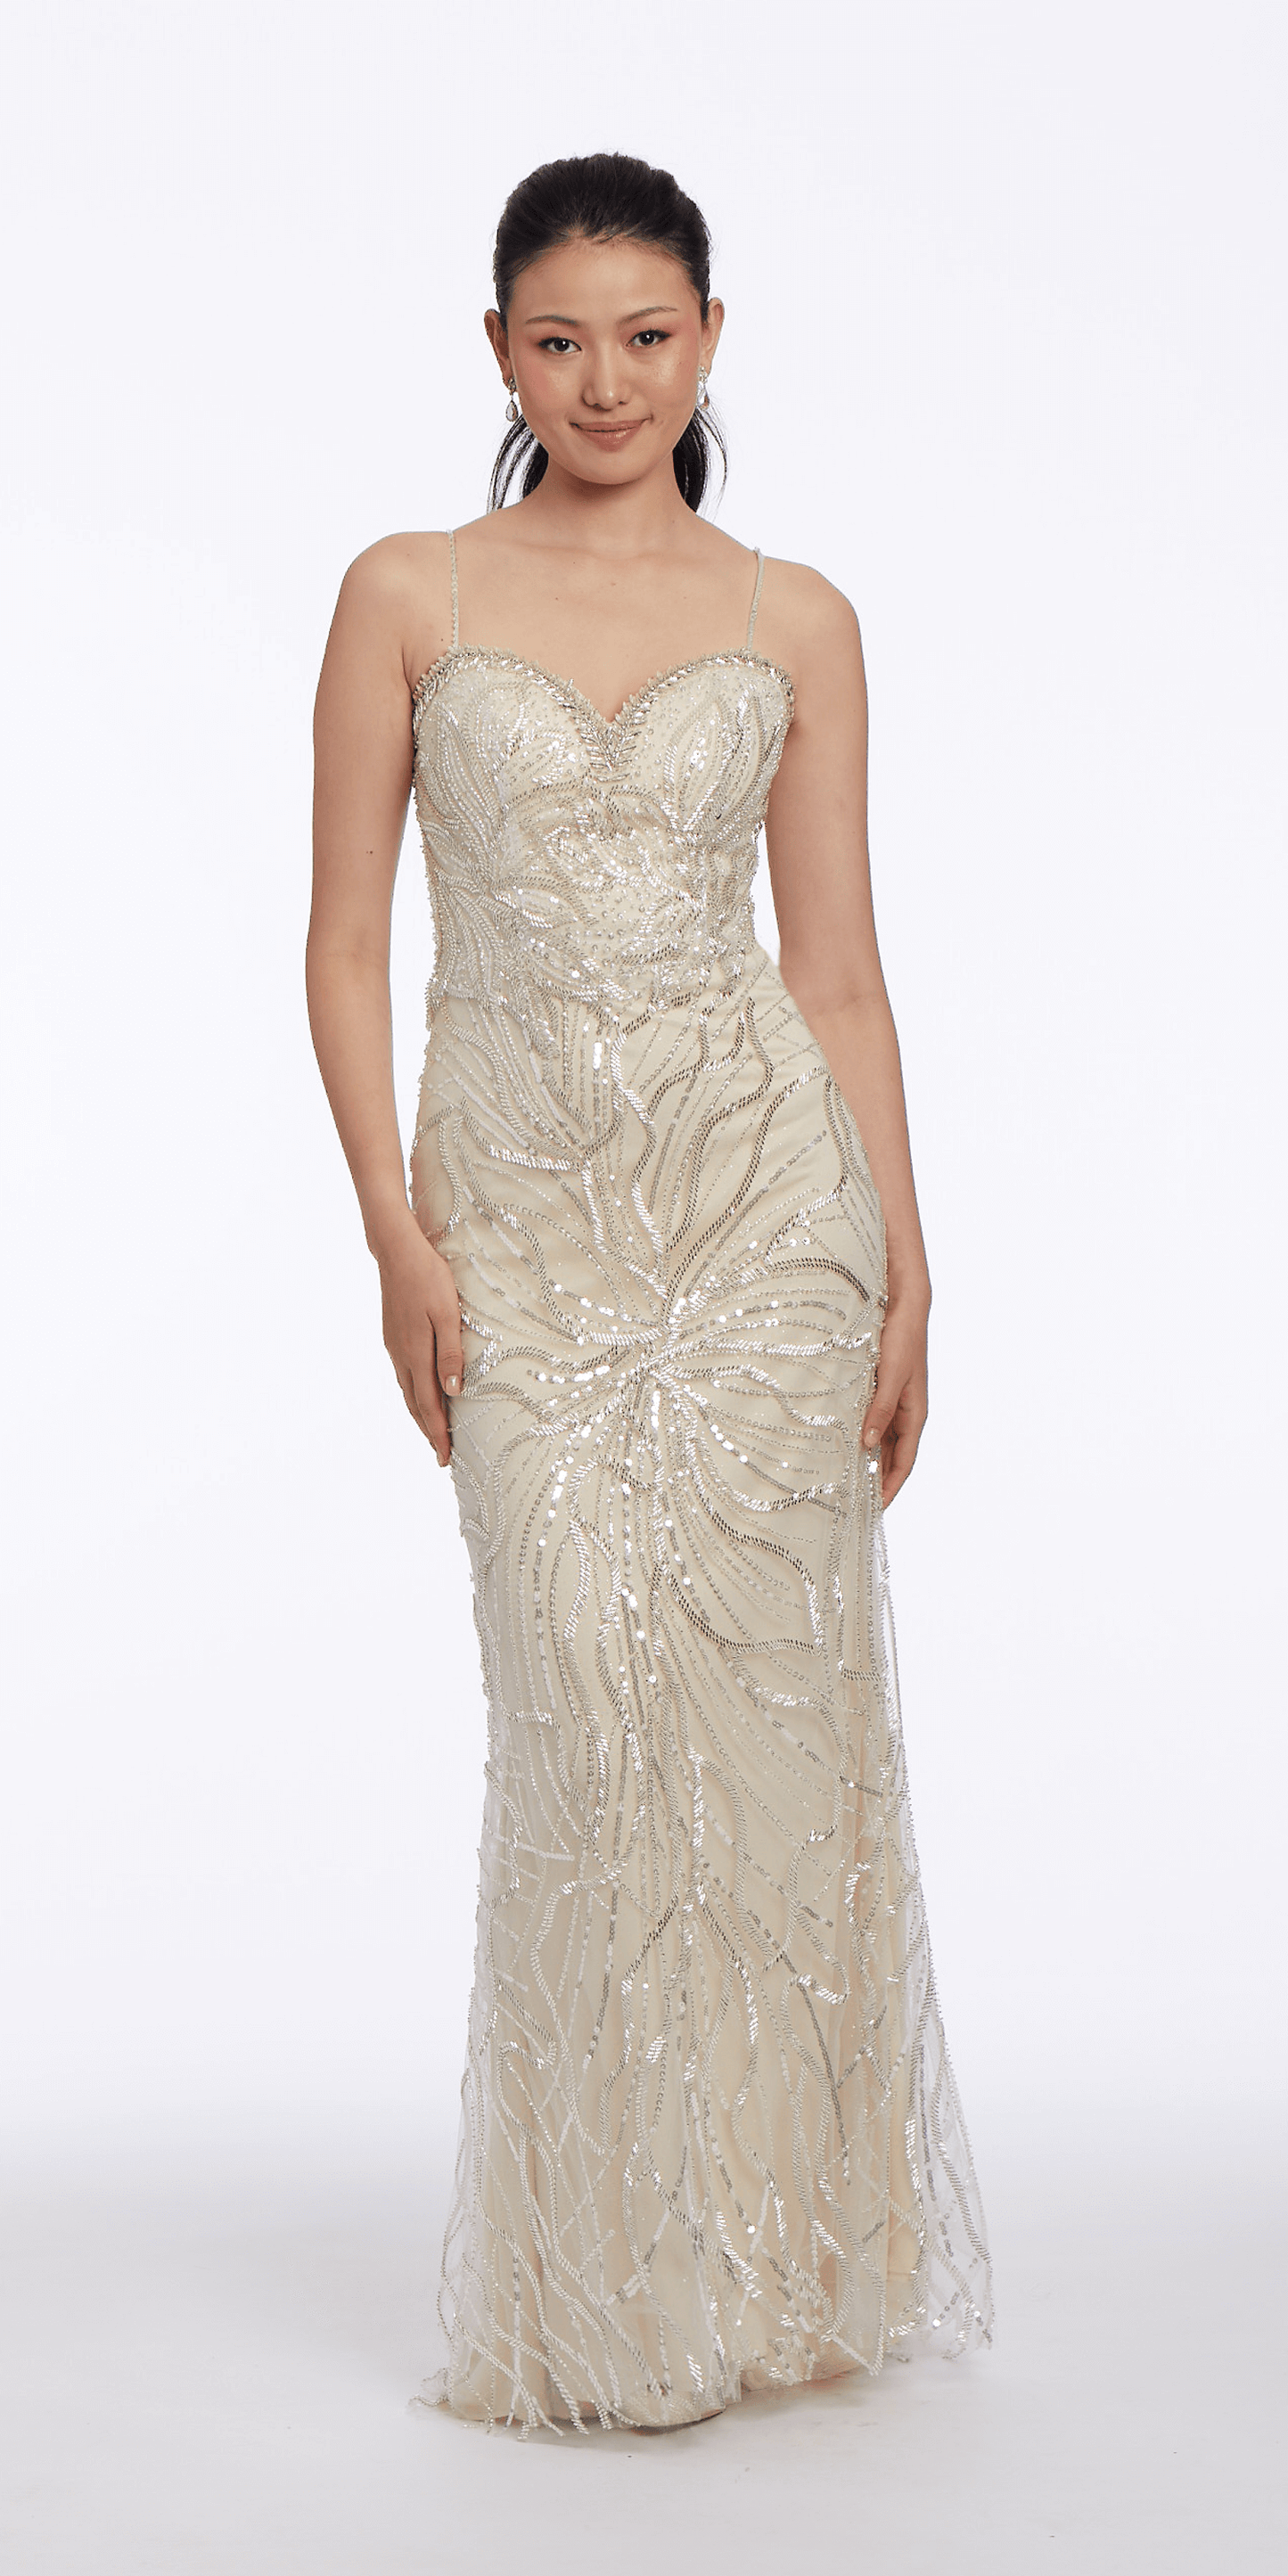 Camille La Vie Abstract Beaded Mesh Sweetheart Column Dress with Sheer Back Panel missy / 0 / ivory-nude